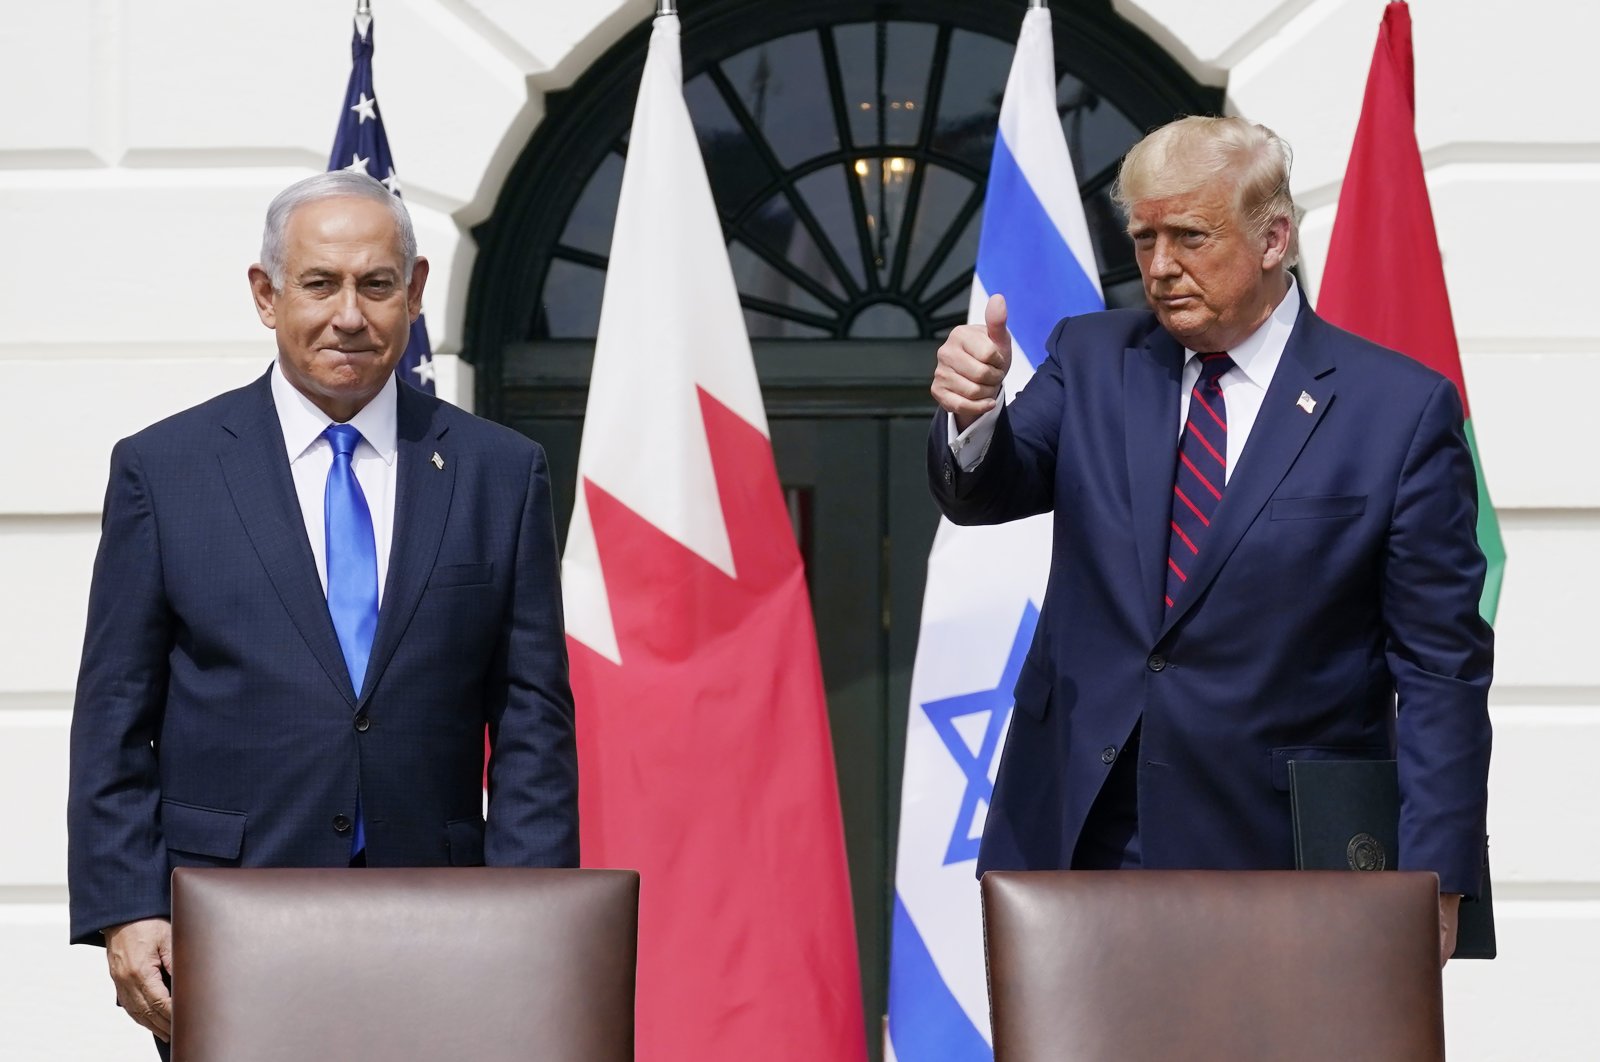 Former U.S.President Donald Trump and Israeli Prime Minister Benjamin Netanyahu attend the Abraham Accords signing ceremony on the South Lawn of the White House, in Washington, U.S., Sept. 15, 2020. (AP Photo)